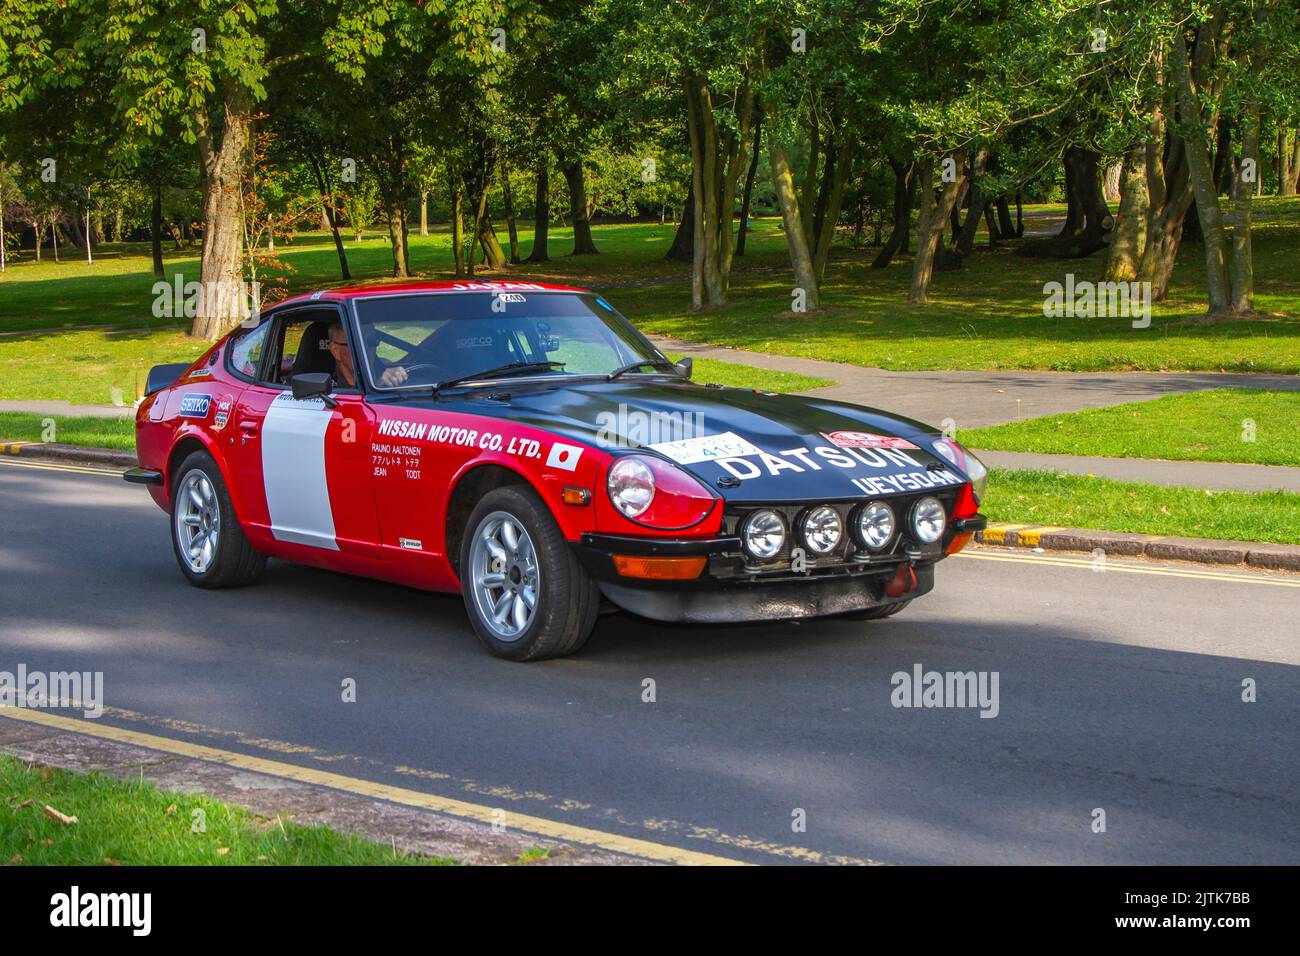 1972 70s, seventies DATSUN 240Z 2393cc sports rally car. Supercar arriving at the annual Stanley Park Classic Car Show. Stanley Park classics yesteryear Motor Show is hosted by Blackpool Vintage Vehicle Preservation Group, UK. Stock Photo